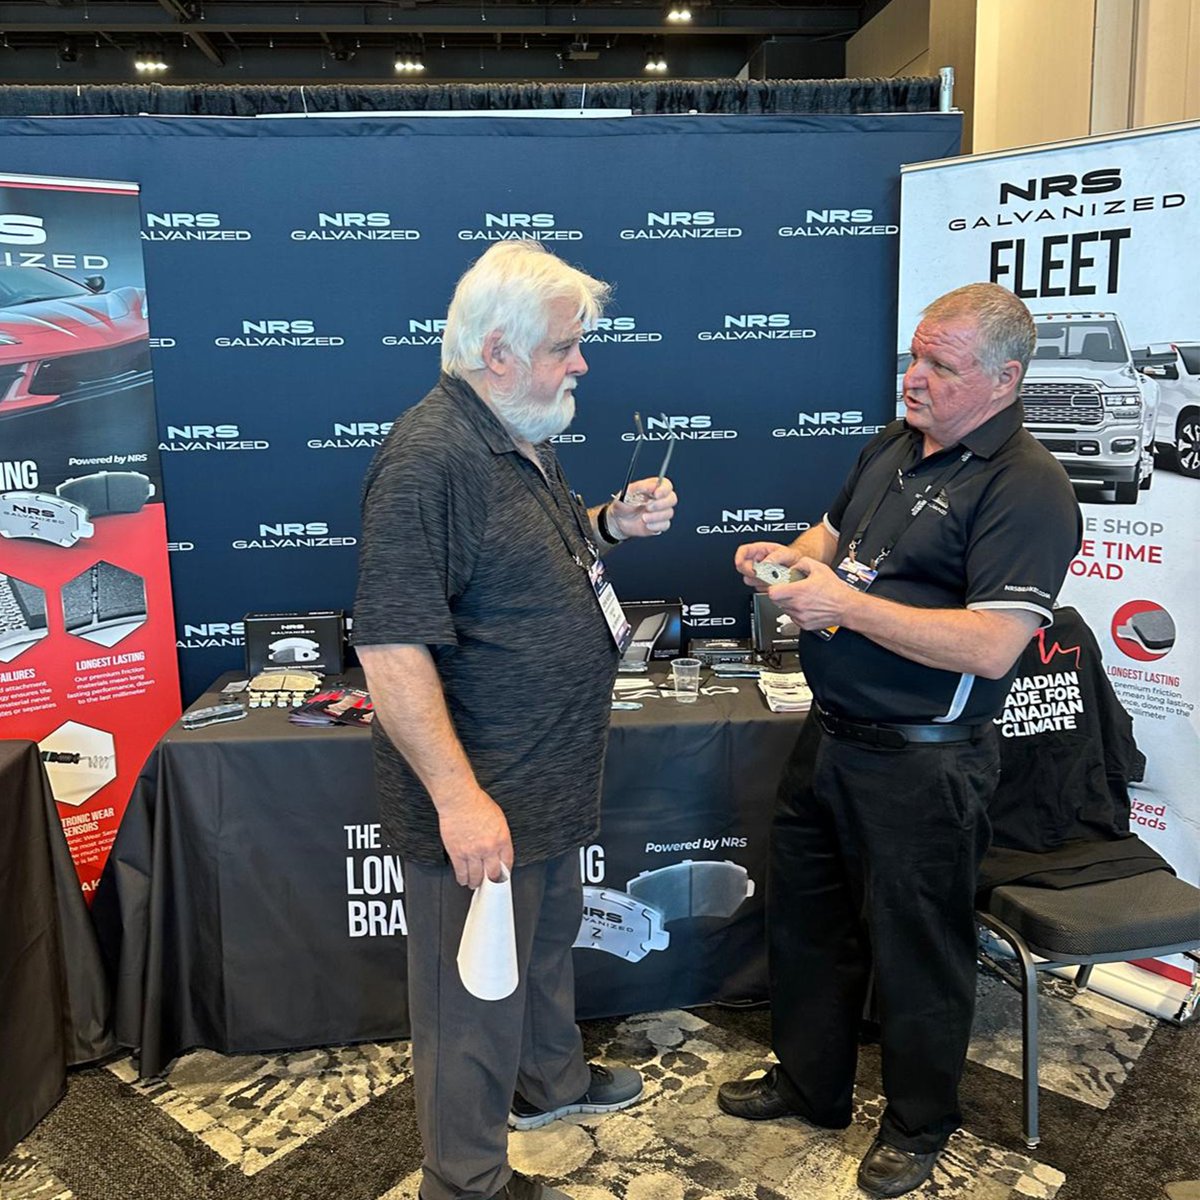 Excited to be at the #ModernSalesCoop Trade Show in Halifax! Swing by Booth 120 to discover the world's quietest, longest-lasting brakes. See you there! #NRSBrakes #TradeShow #GalvanizedBrakeProgram